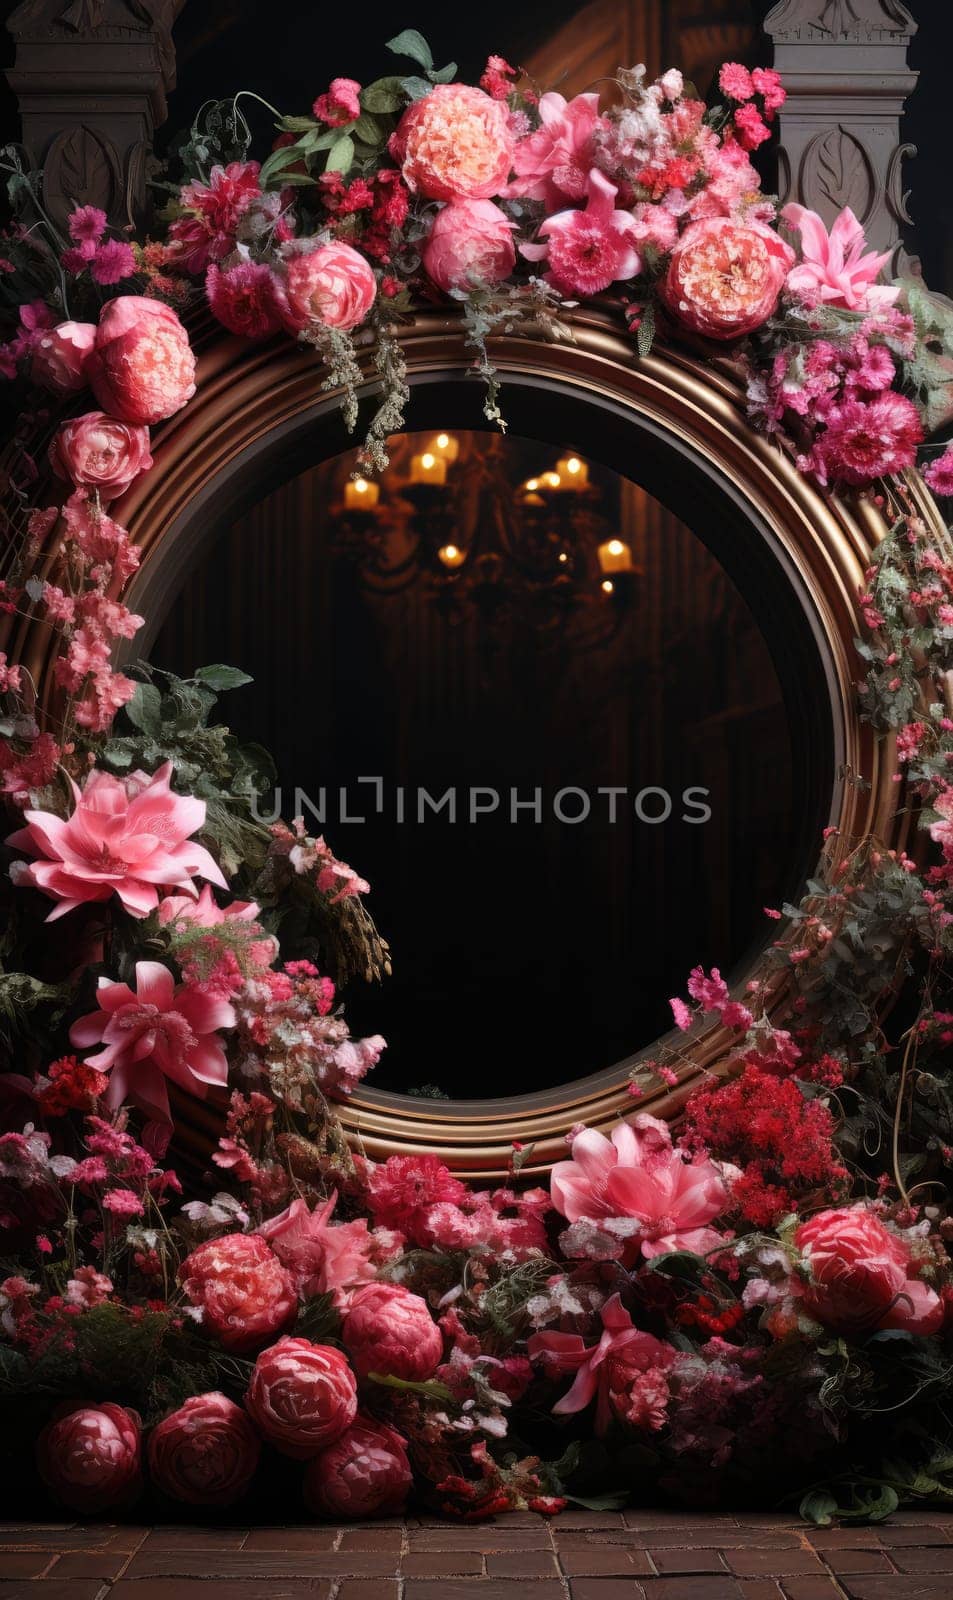 floral hoop digital backdrops. shoot set up with prop Flower and wood backdrop by PeaceYAY